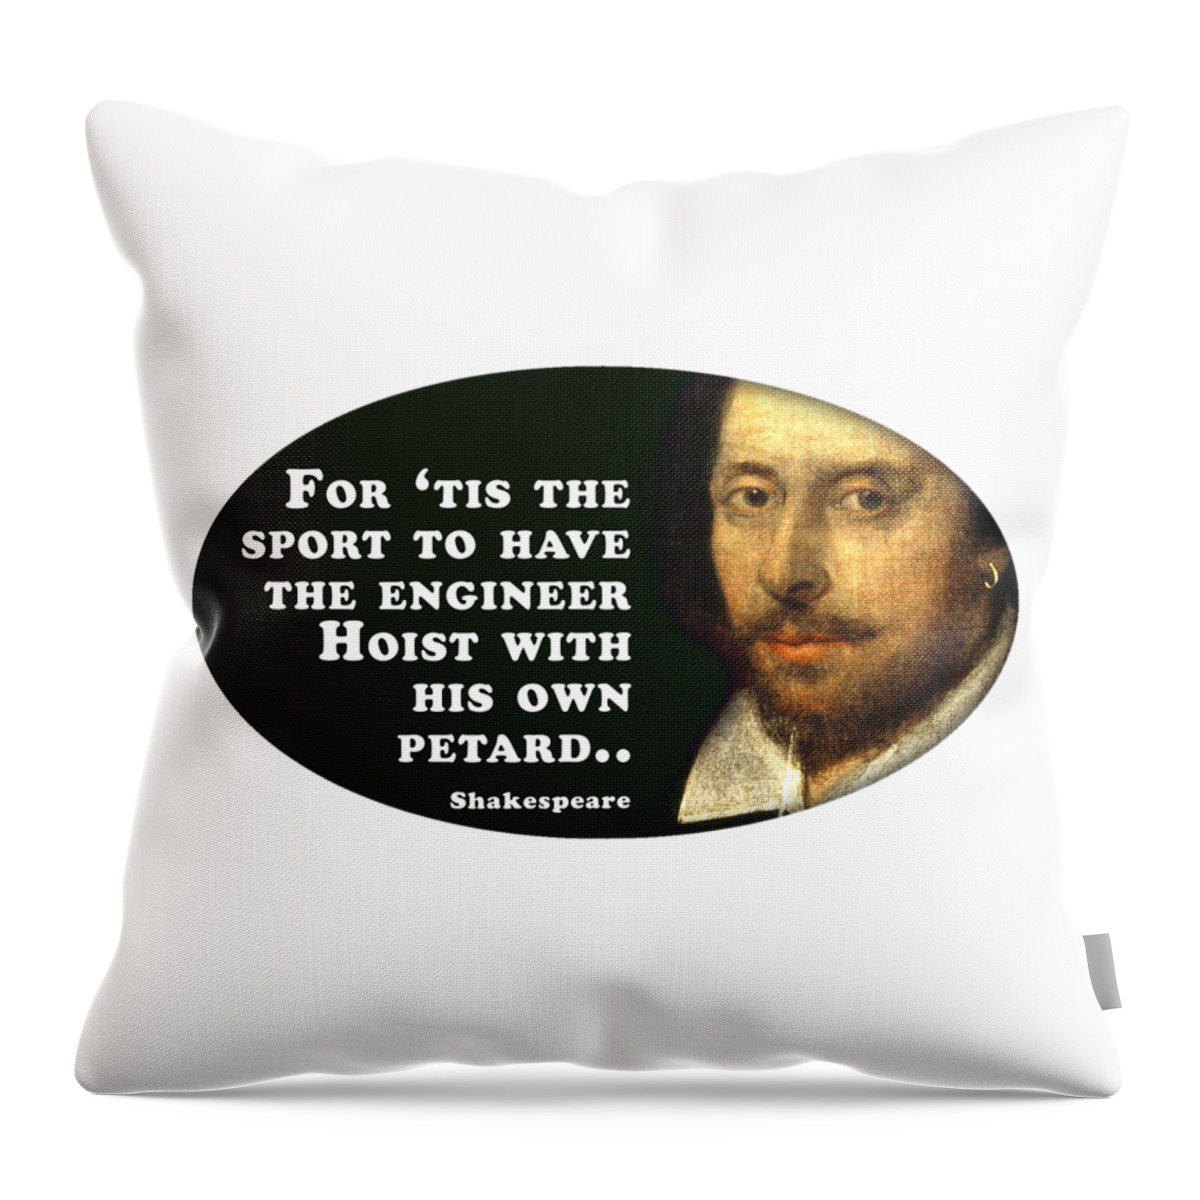 For Throw Pillow featuring the digital art For 'tis the sport to have the engineer #shakespeare #shakespearequote #6 by TintoDesigns